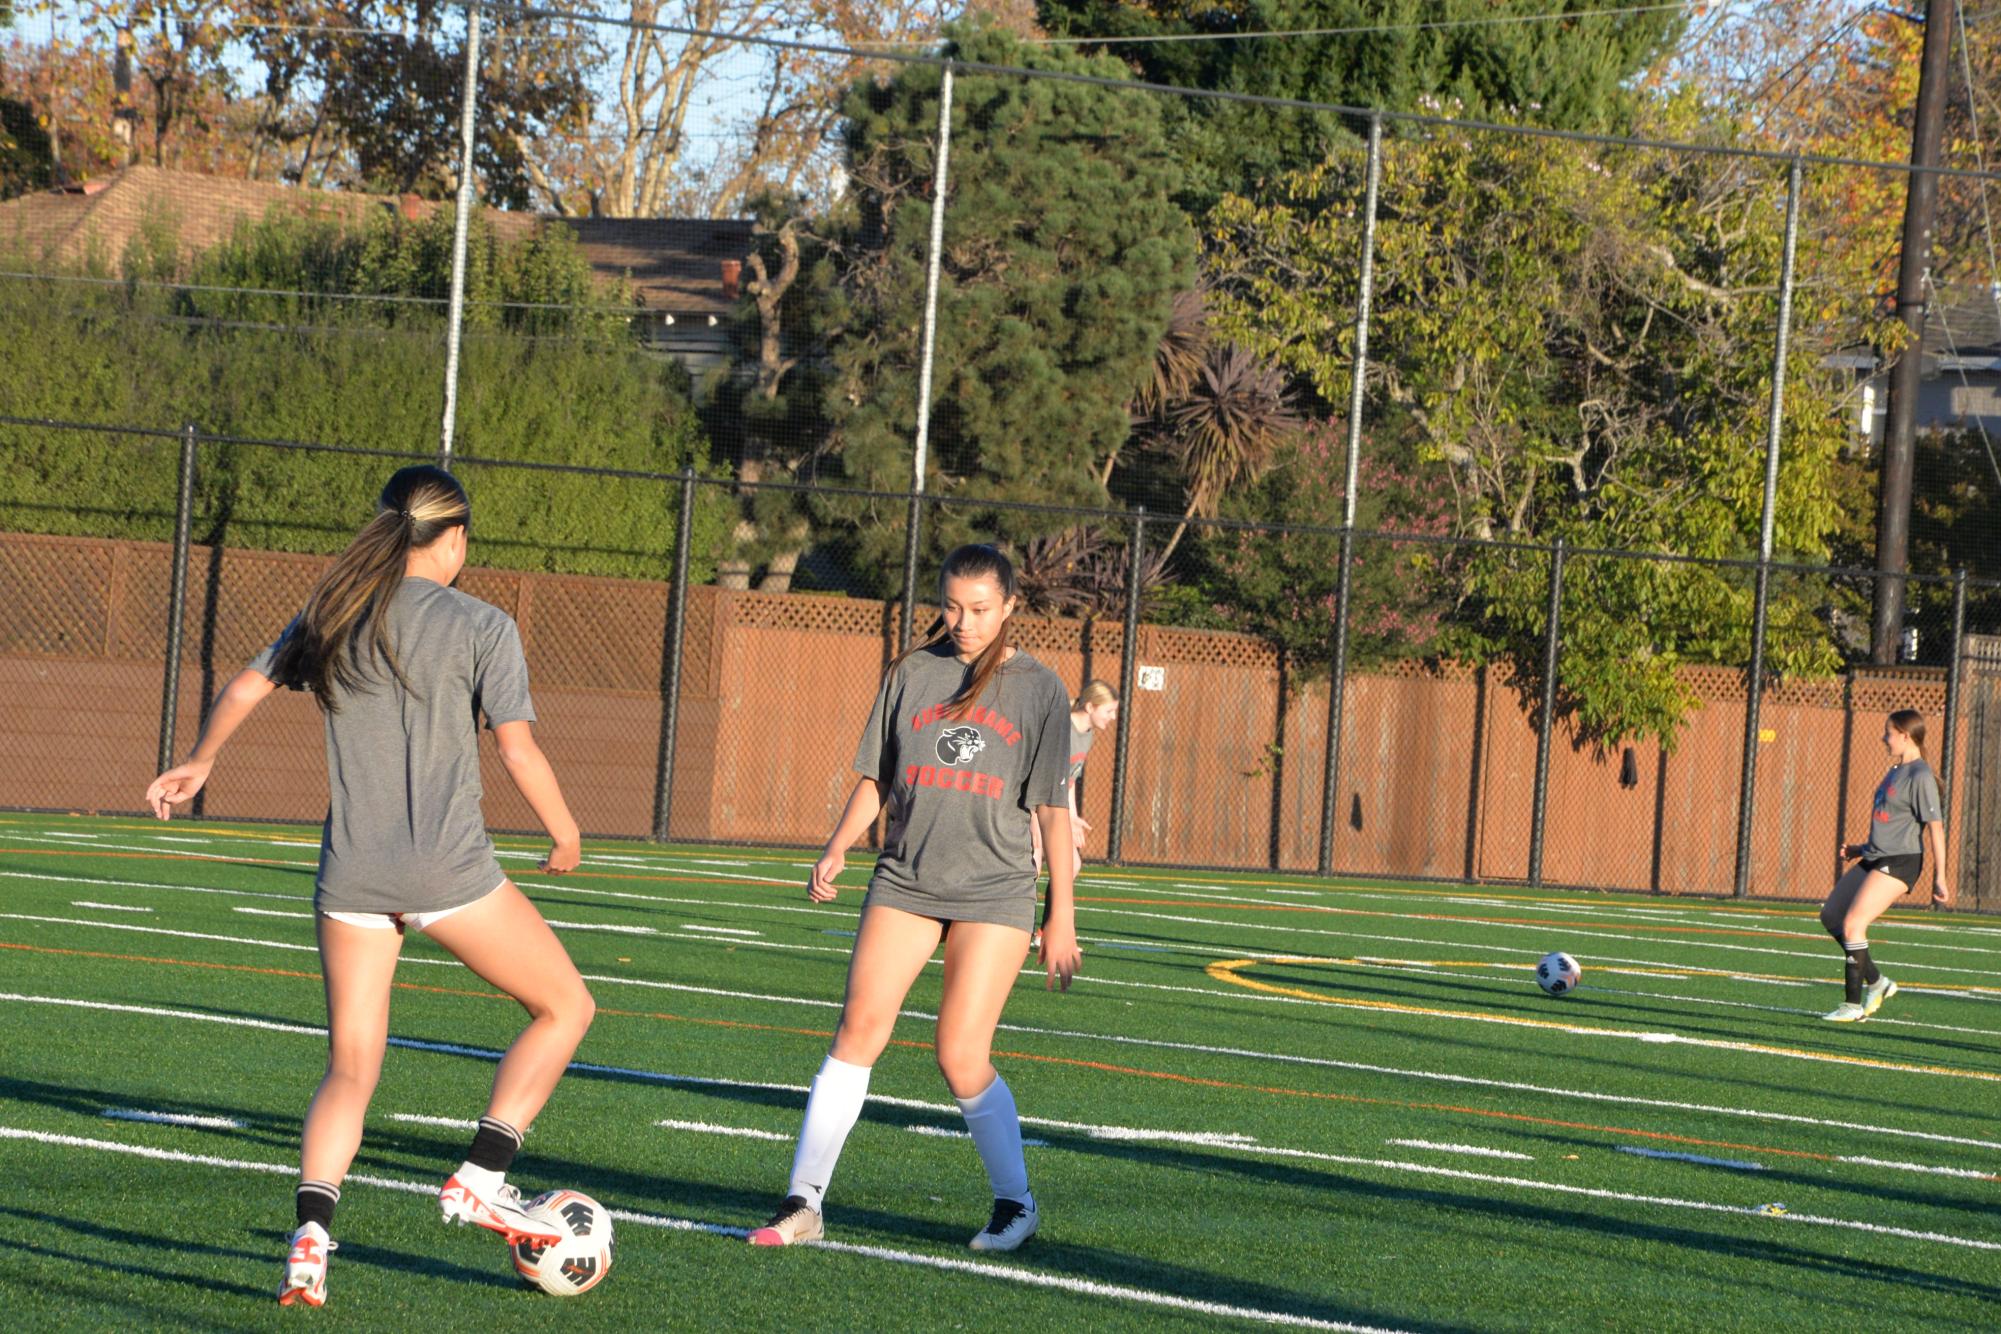 Seniors Olivia Armstrong and Kaylee Ng pass the ball to each other during practice.